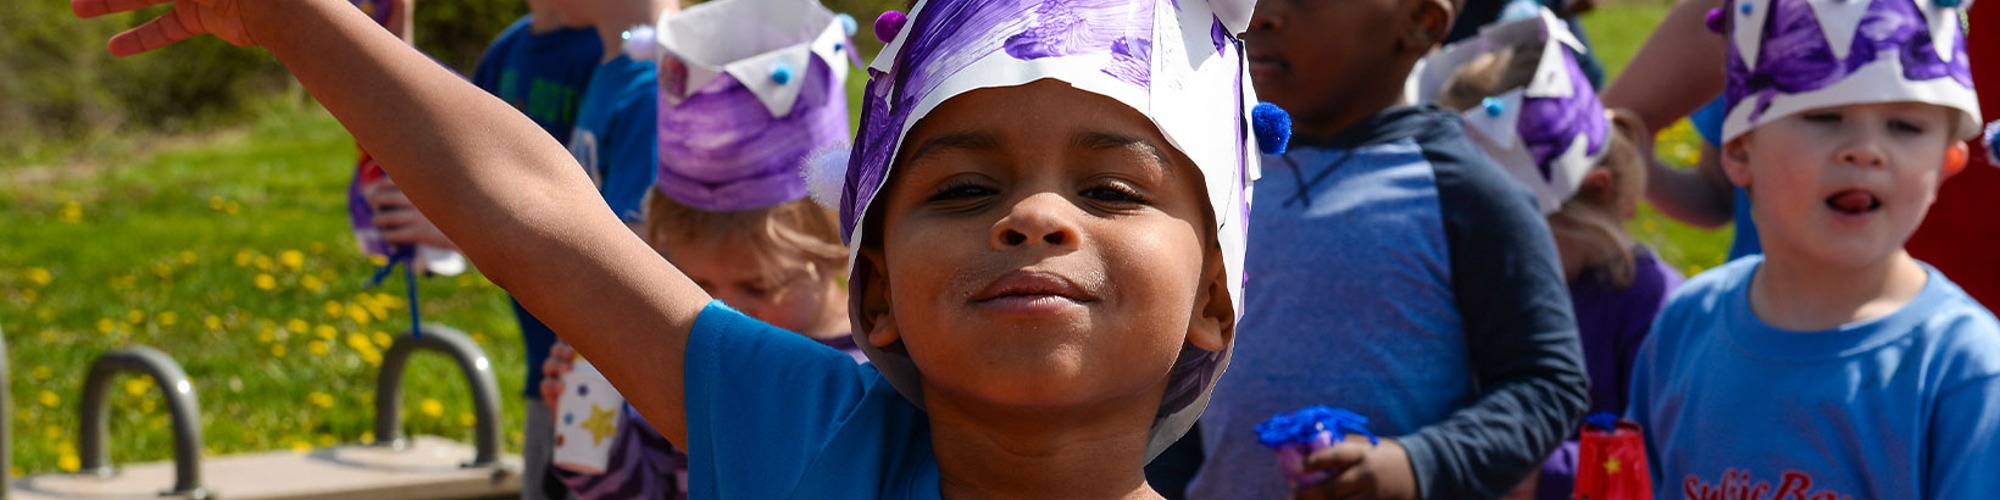 a child with purple paper on head